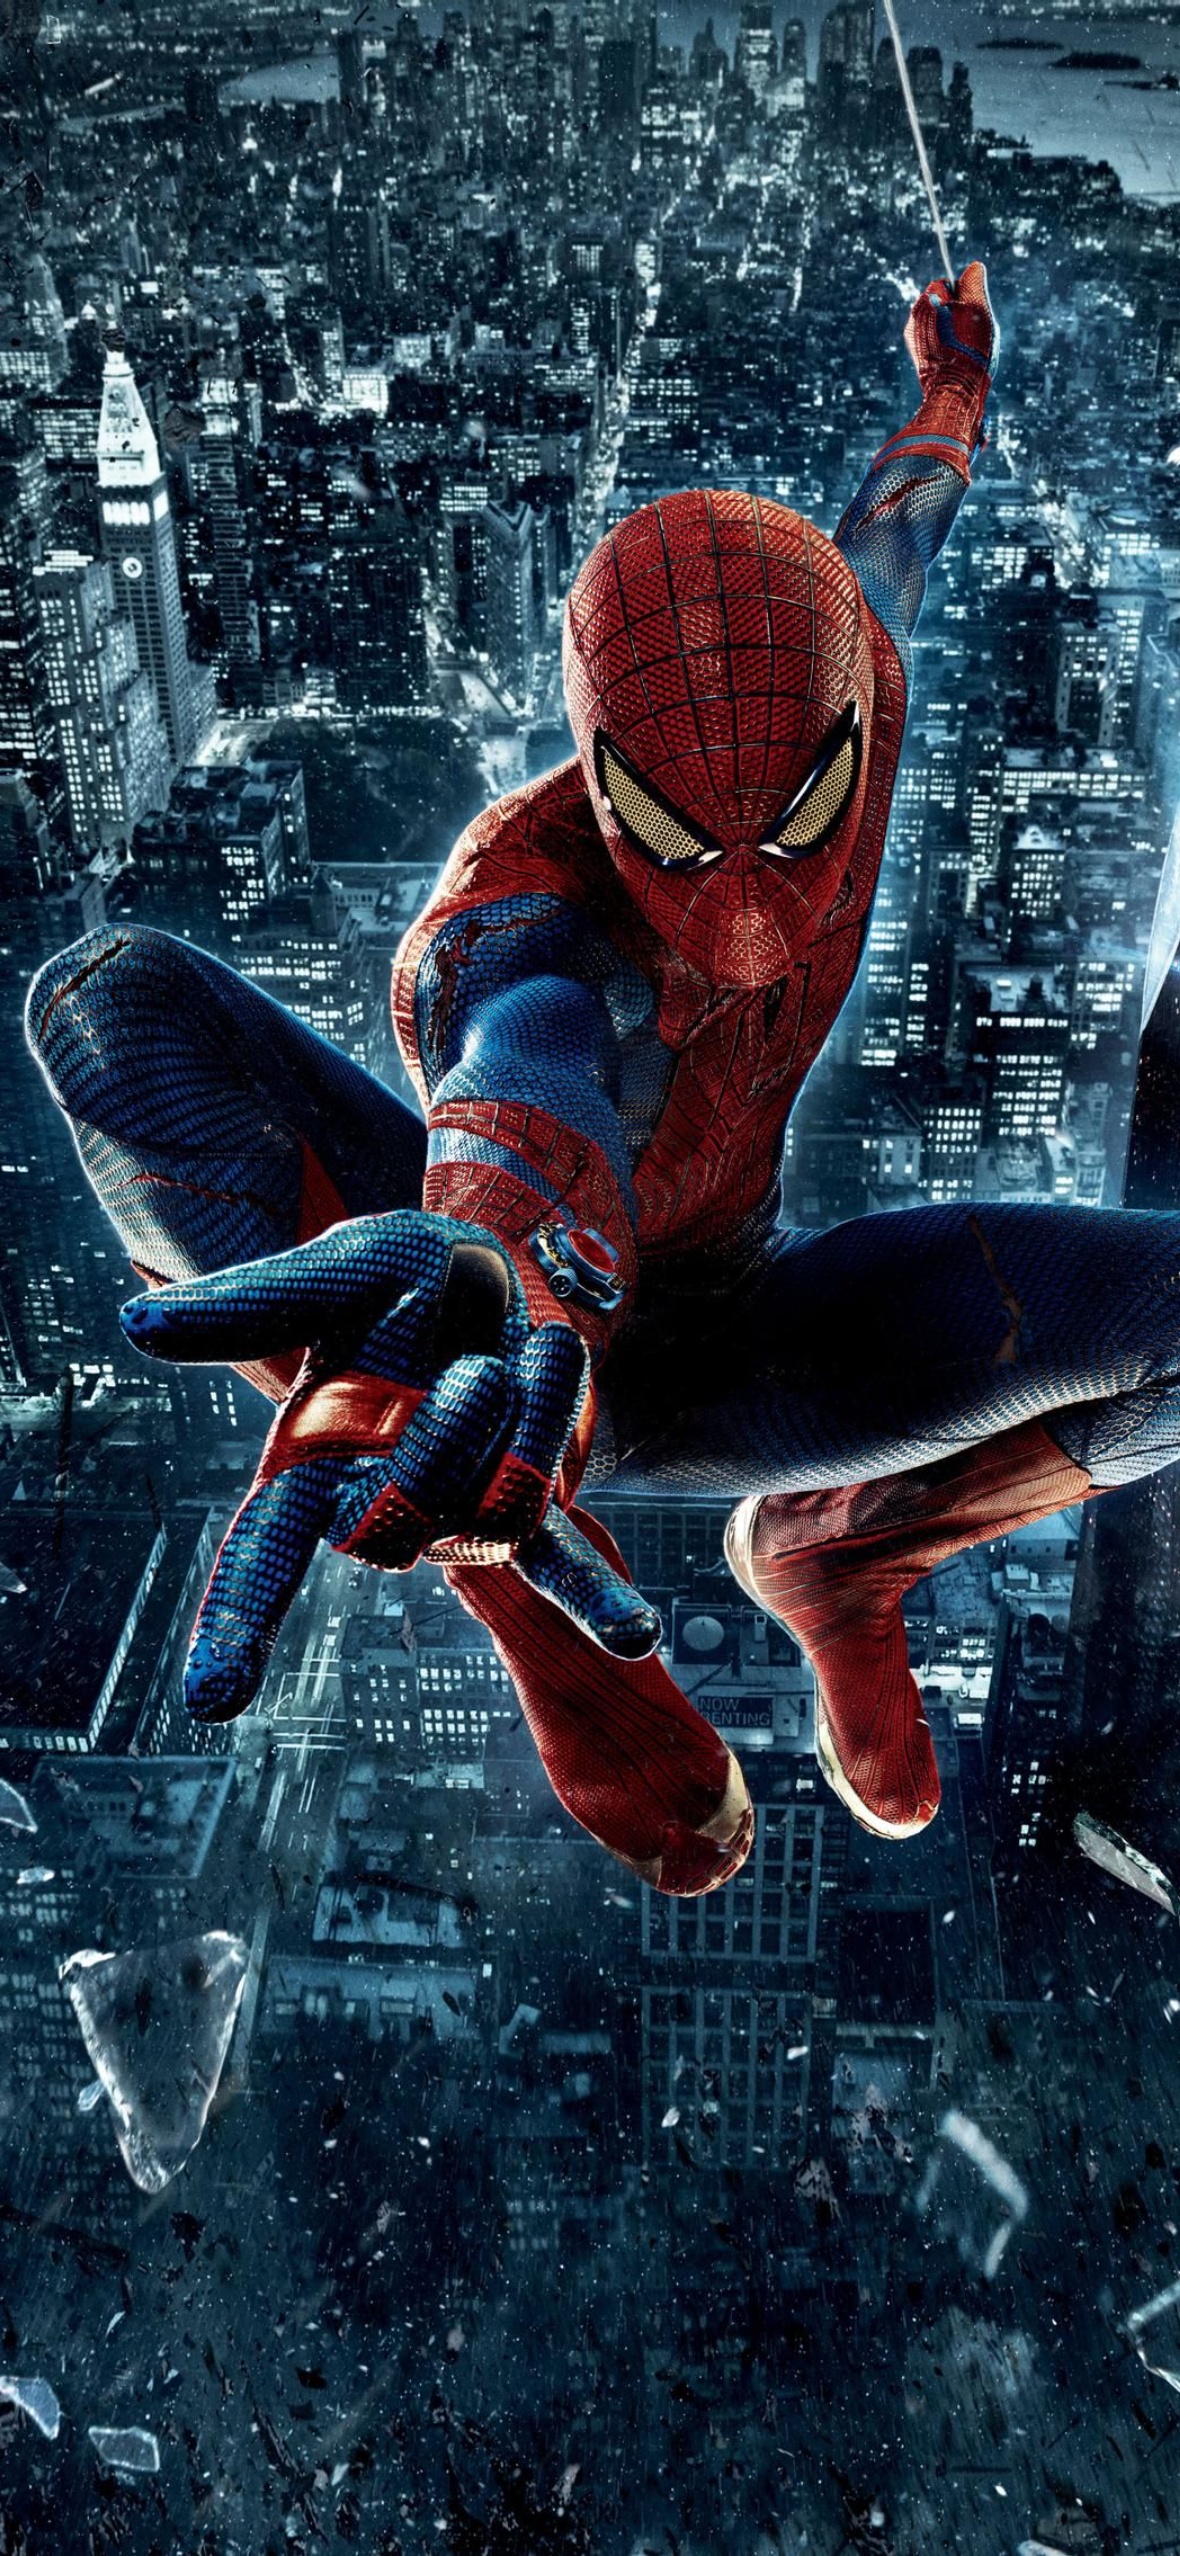 Spiderman Wallpaper For iPhone